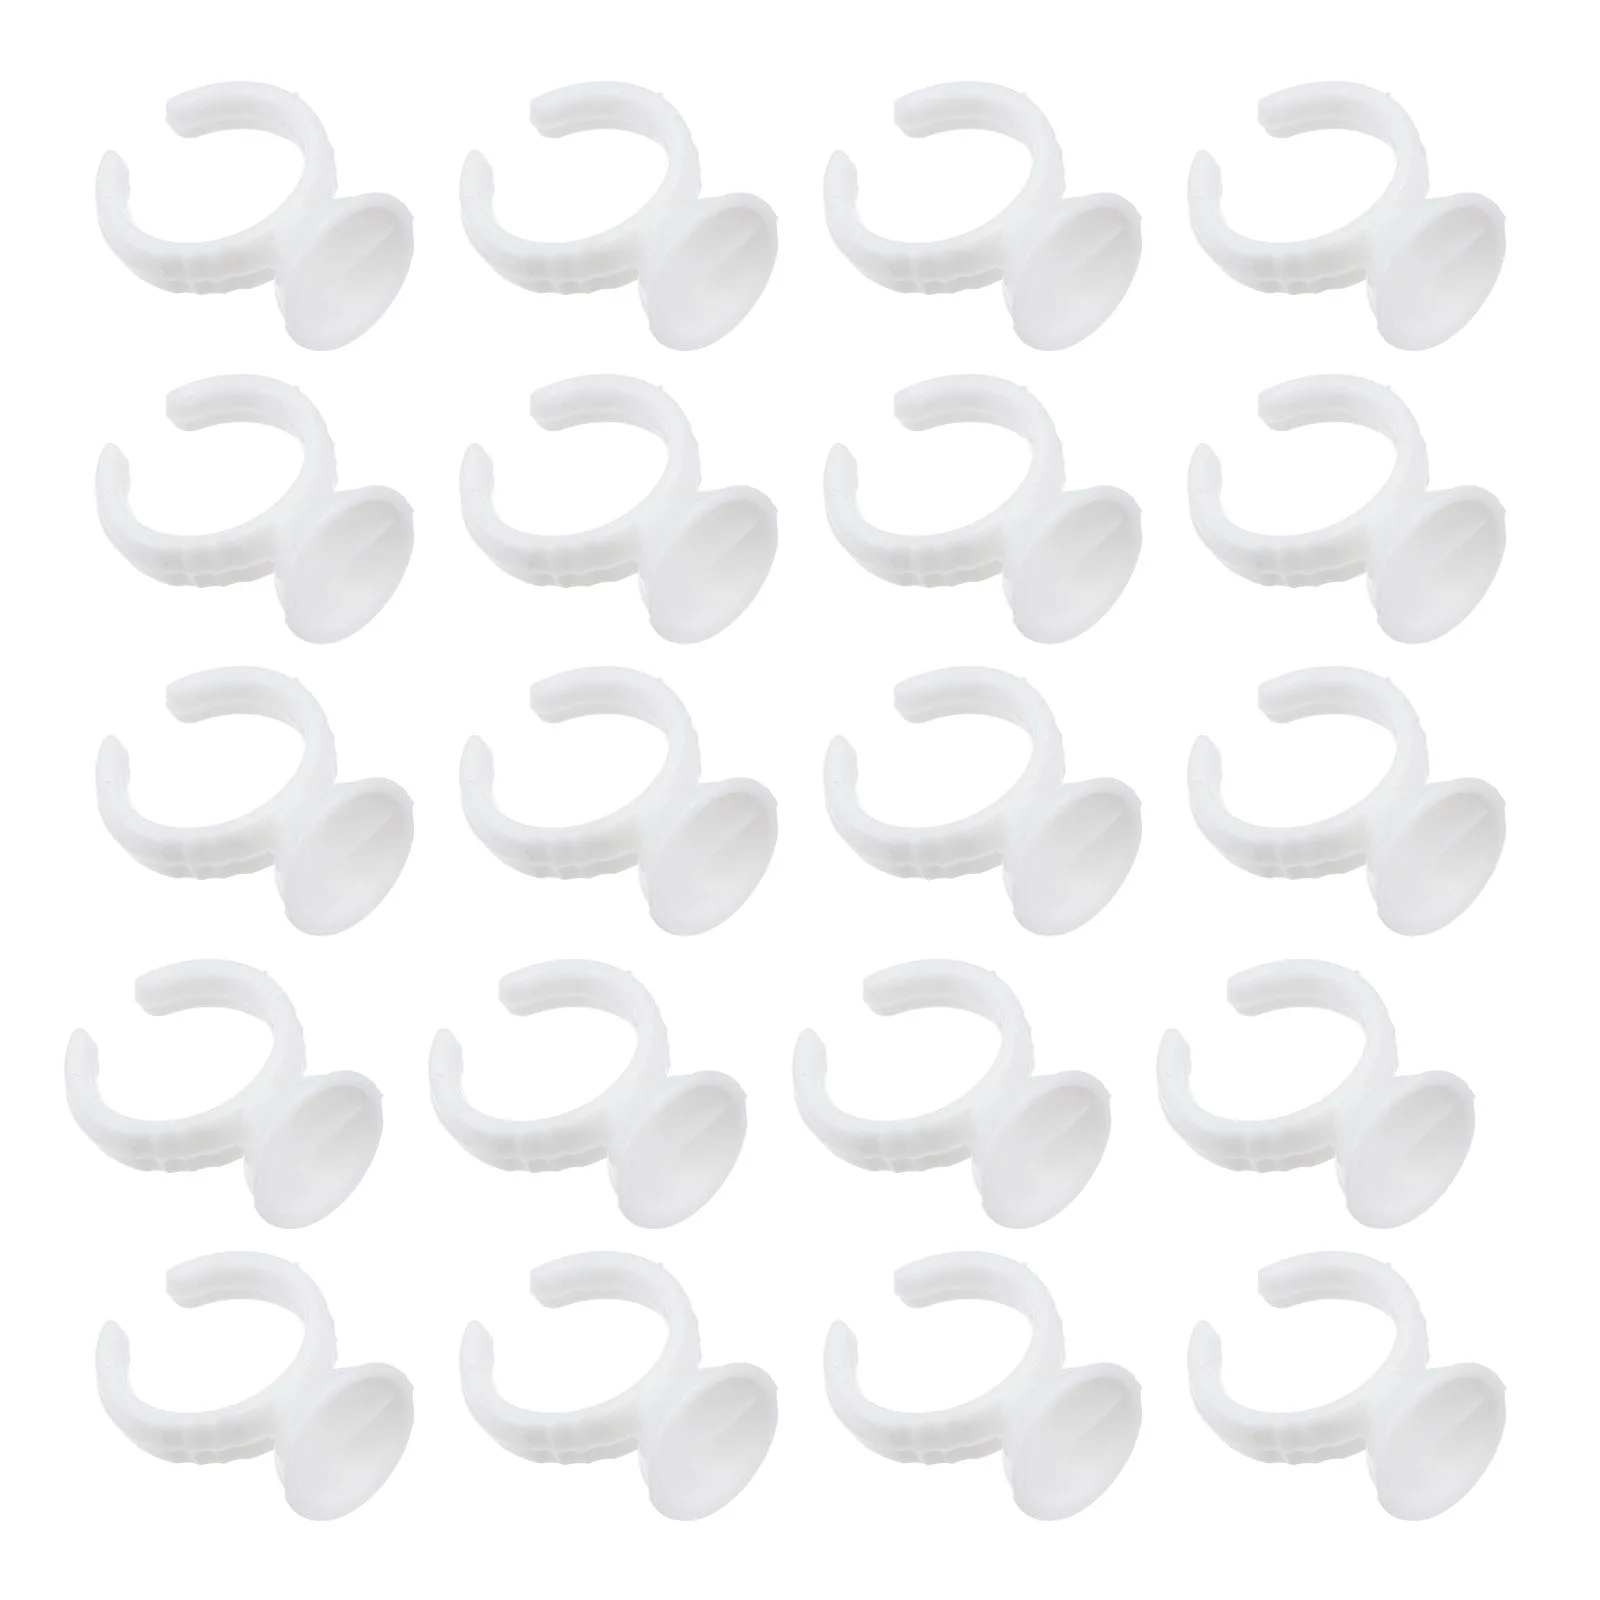 

100pcs Glue Ring Cup Glue Pallet Holder Volume Glue Ring Eyelash Pigment Holder Adhesive Pigment Holder Makeup Rings Cup for